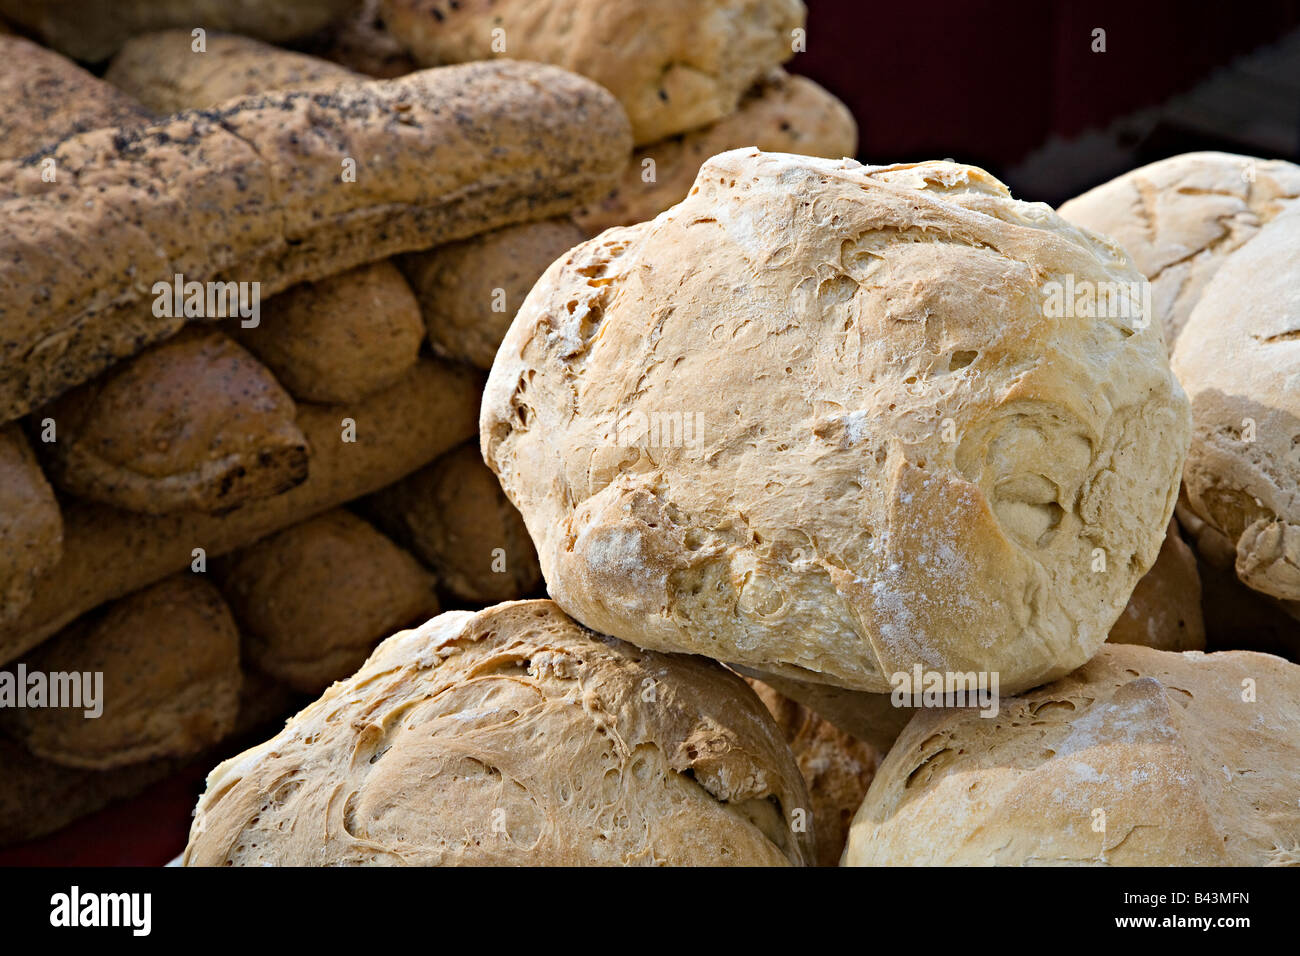 Fresh baked white crusty loaf of bread at farmers market UK Stock Photo